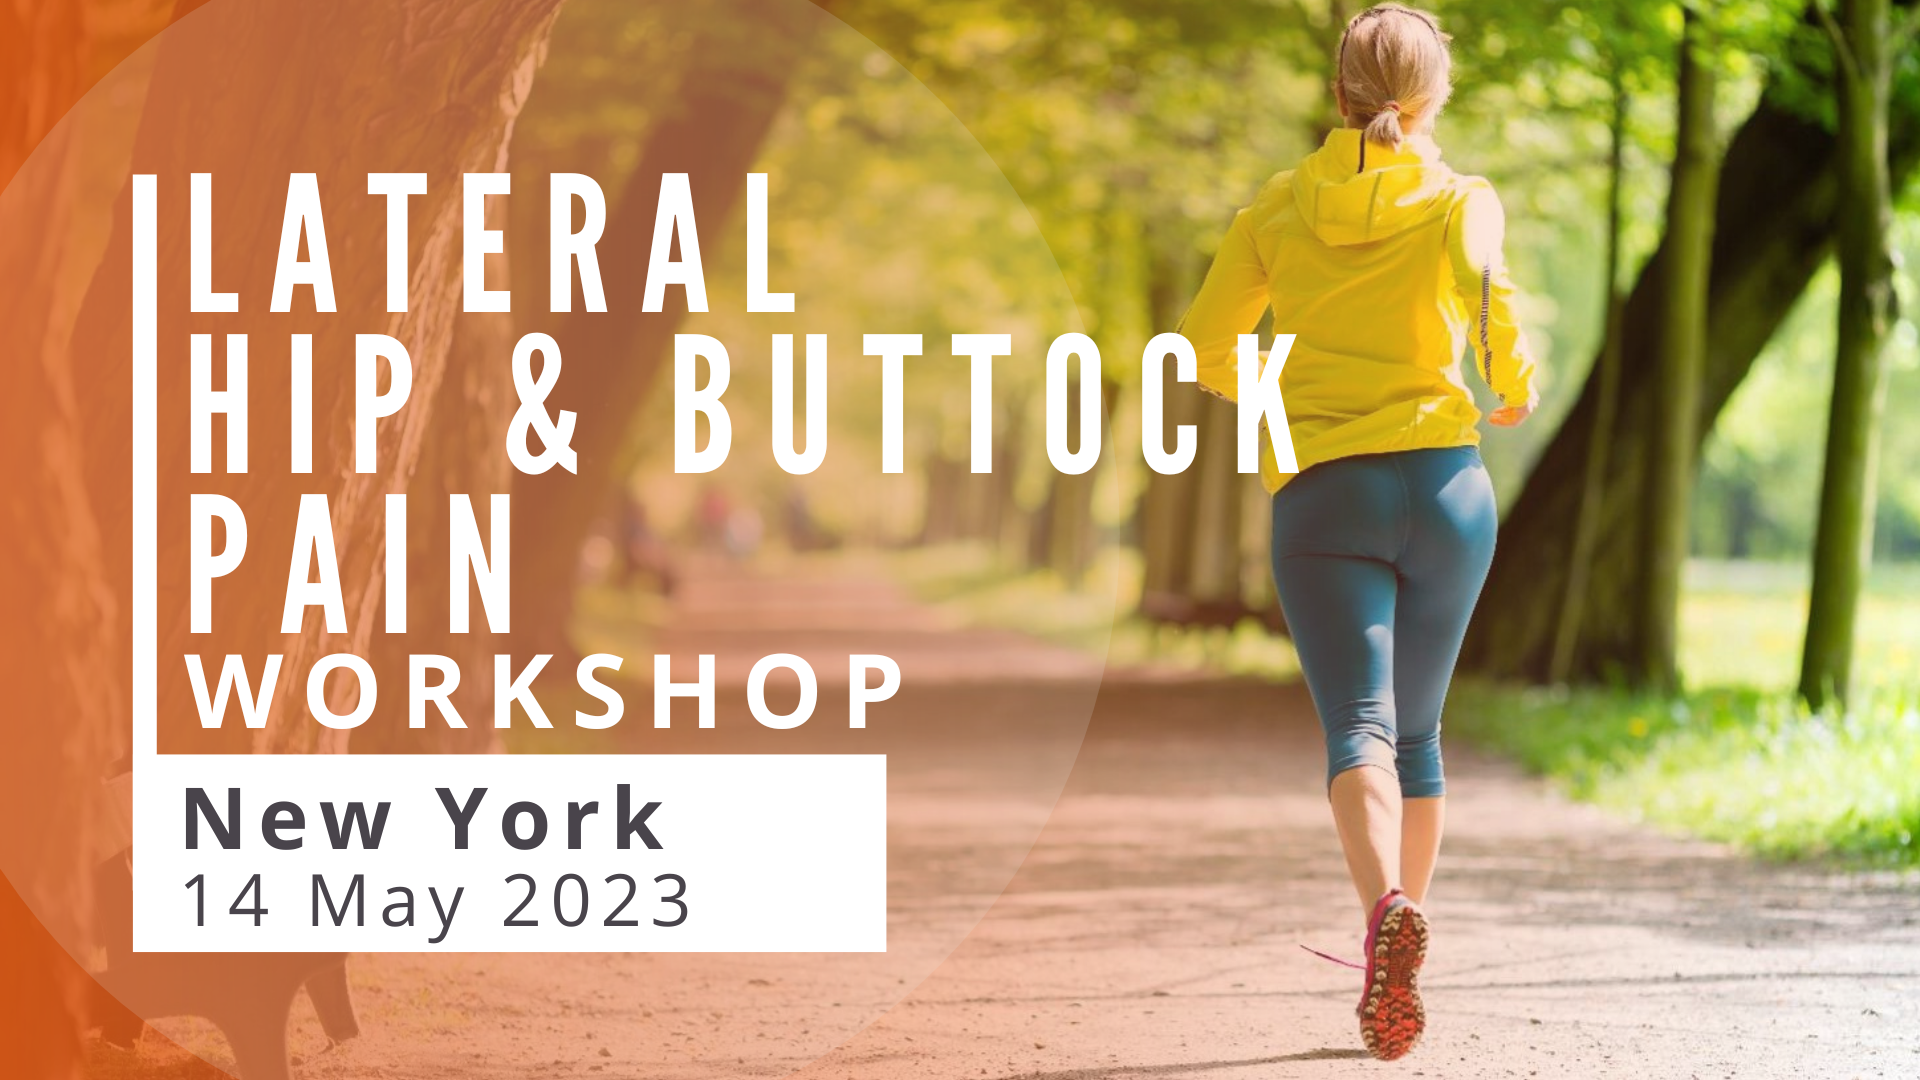 Lateral Hip and Buttock Pain Workshop for Physical Therapists in New York, 2023